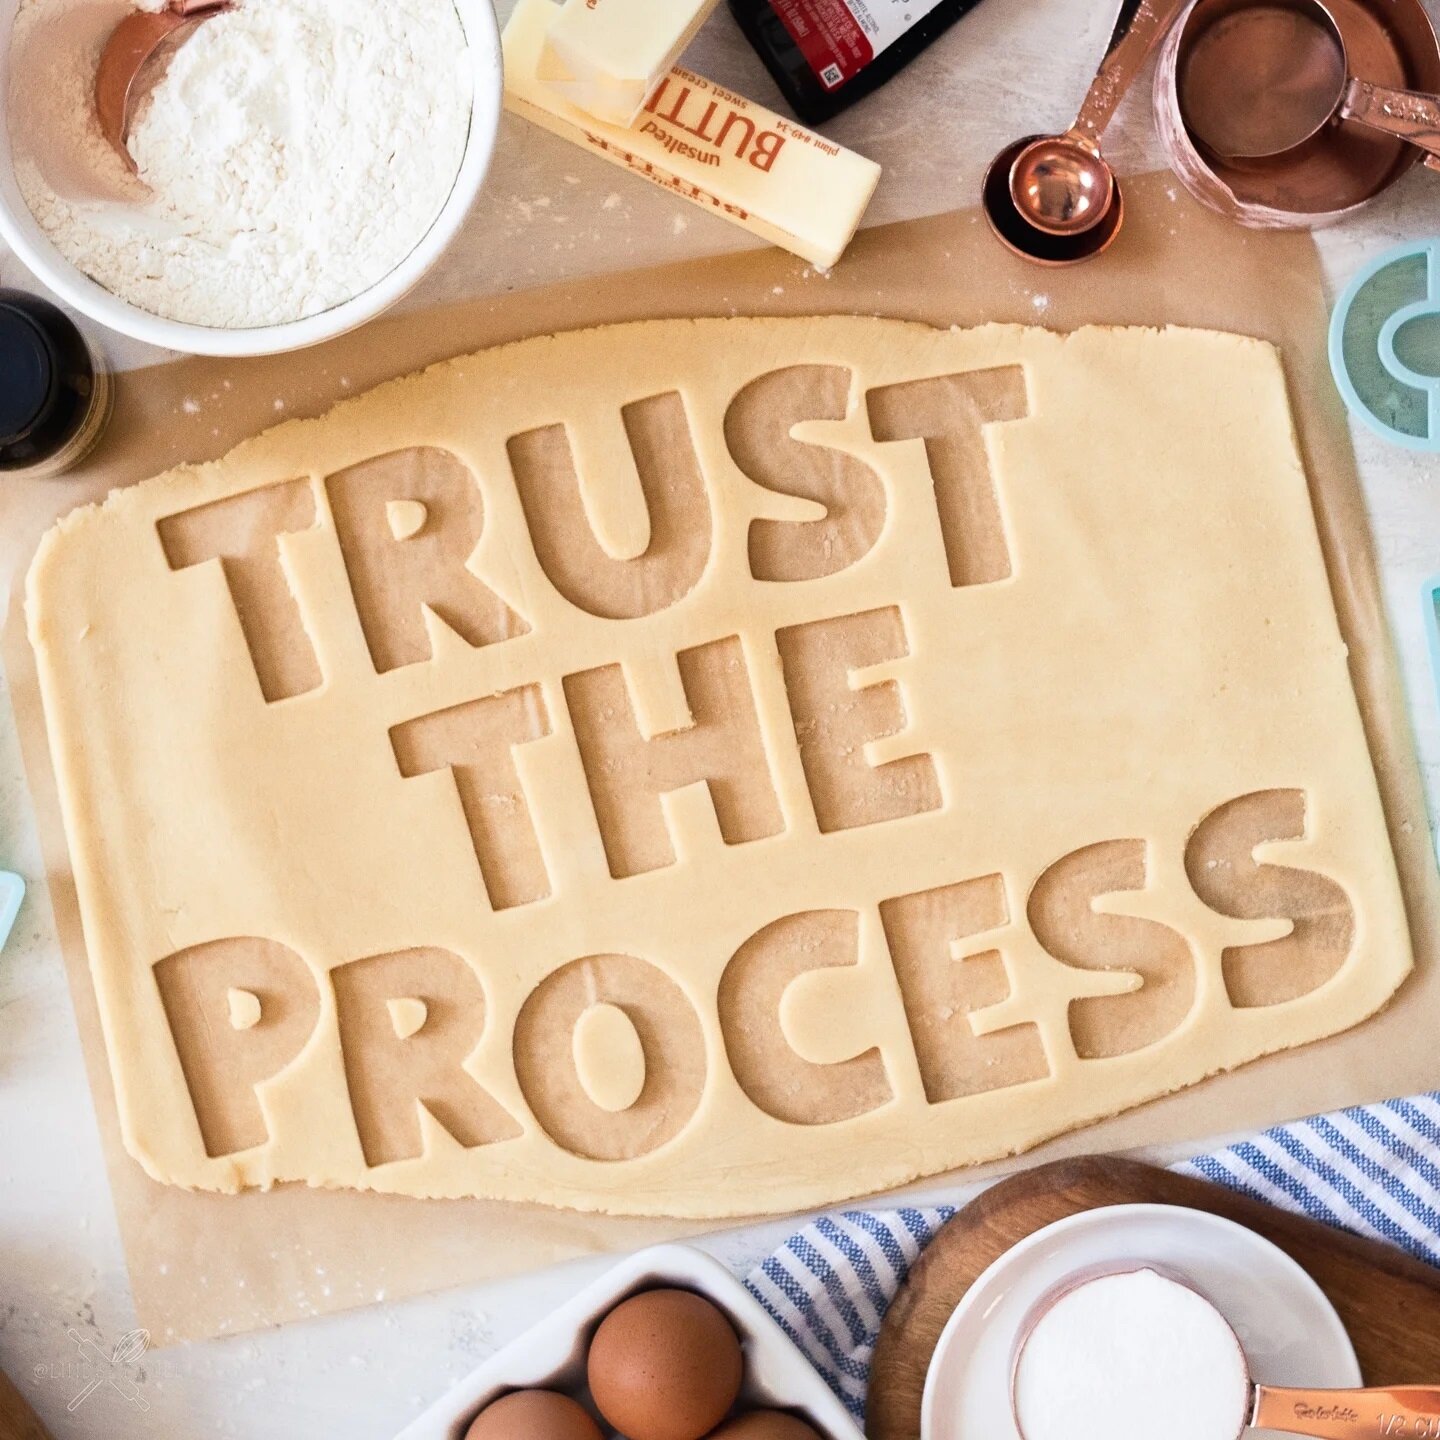 Do you ever get impatient with the &quot;process&quot;? ⁠
⁠
I sure do.⁠
⁠
Also, as a control freak, I am not prone to just let things work themselves out. I need to be doing something!⁠
⁠
However, I am having to remind myself that I can't control eve